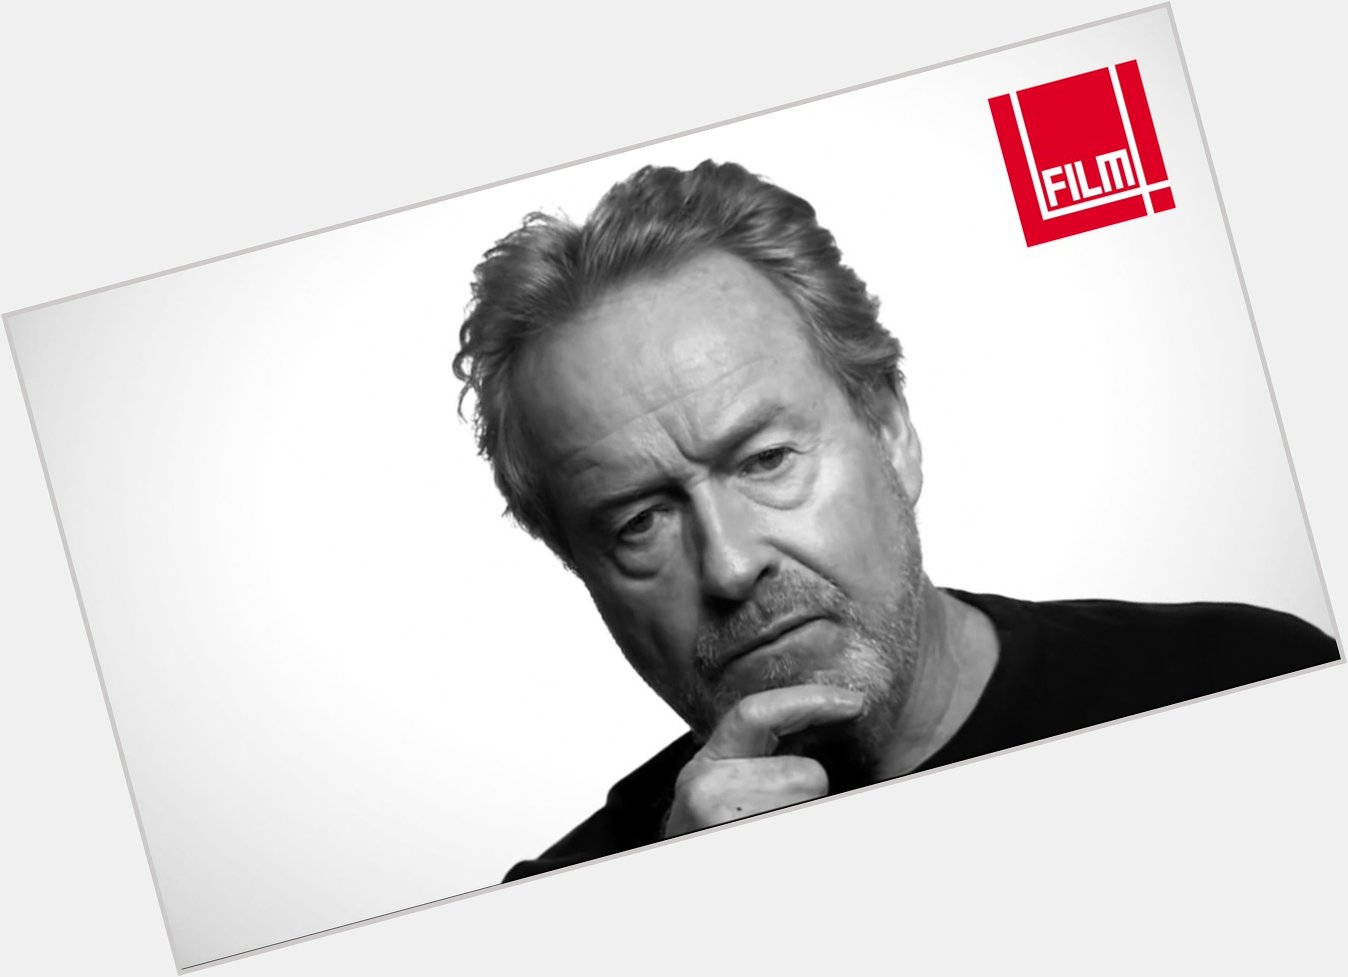 Happy 80th birthday Sir Ridley Scott, perhaps the greatest British filmmaker of all time.  